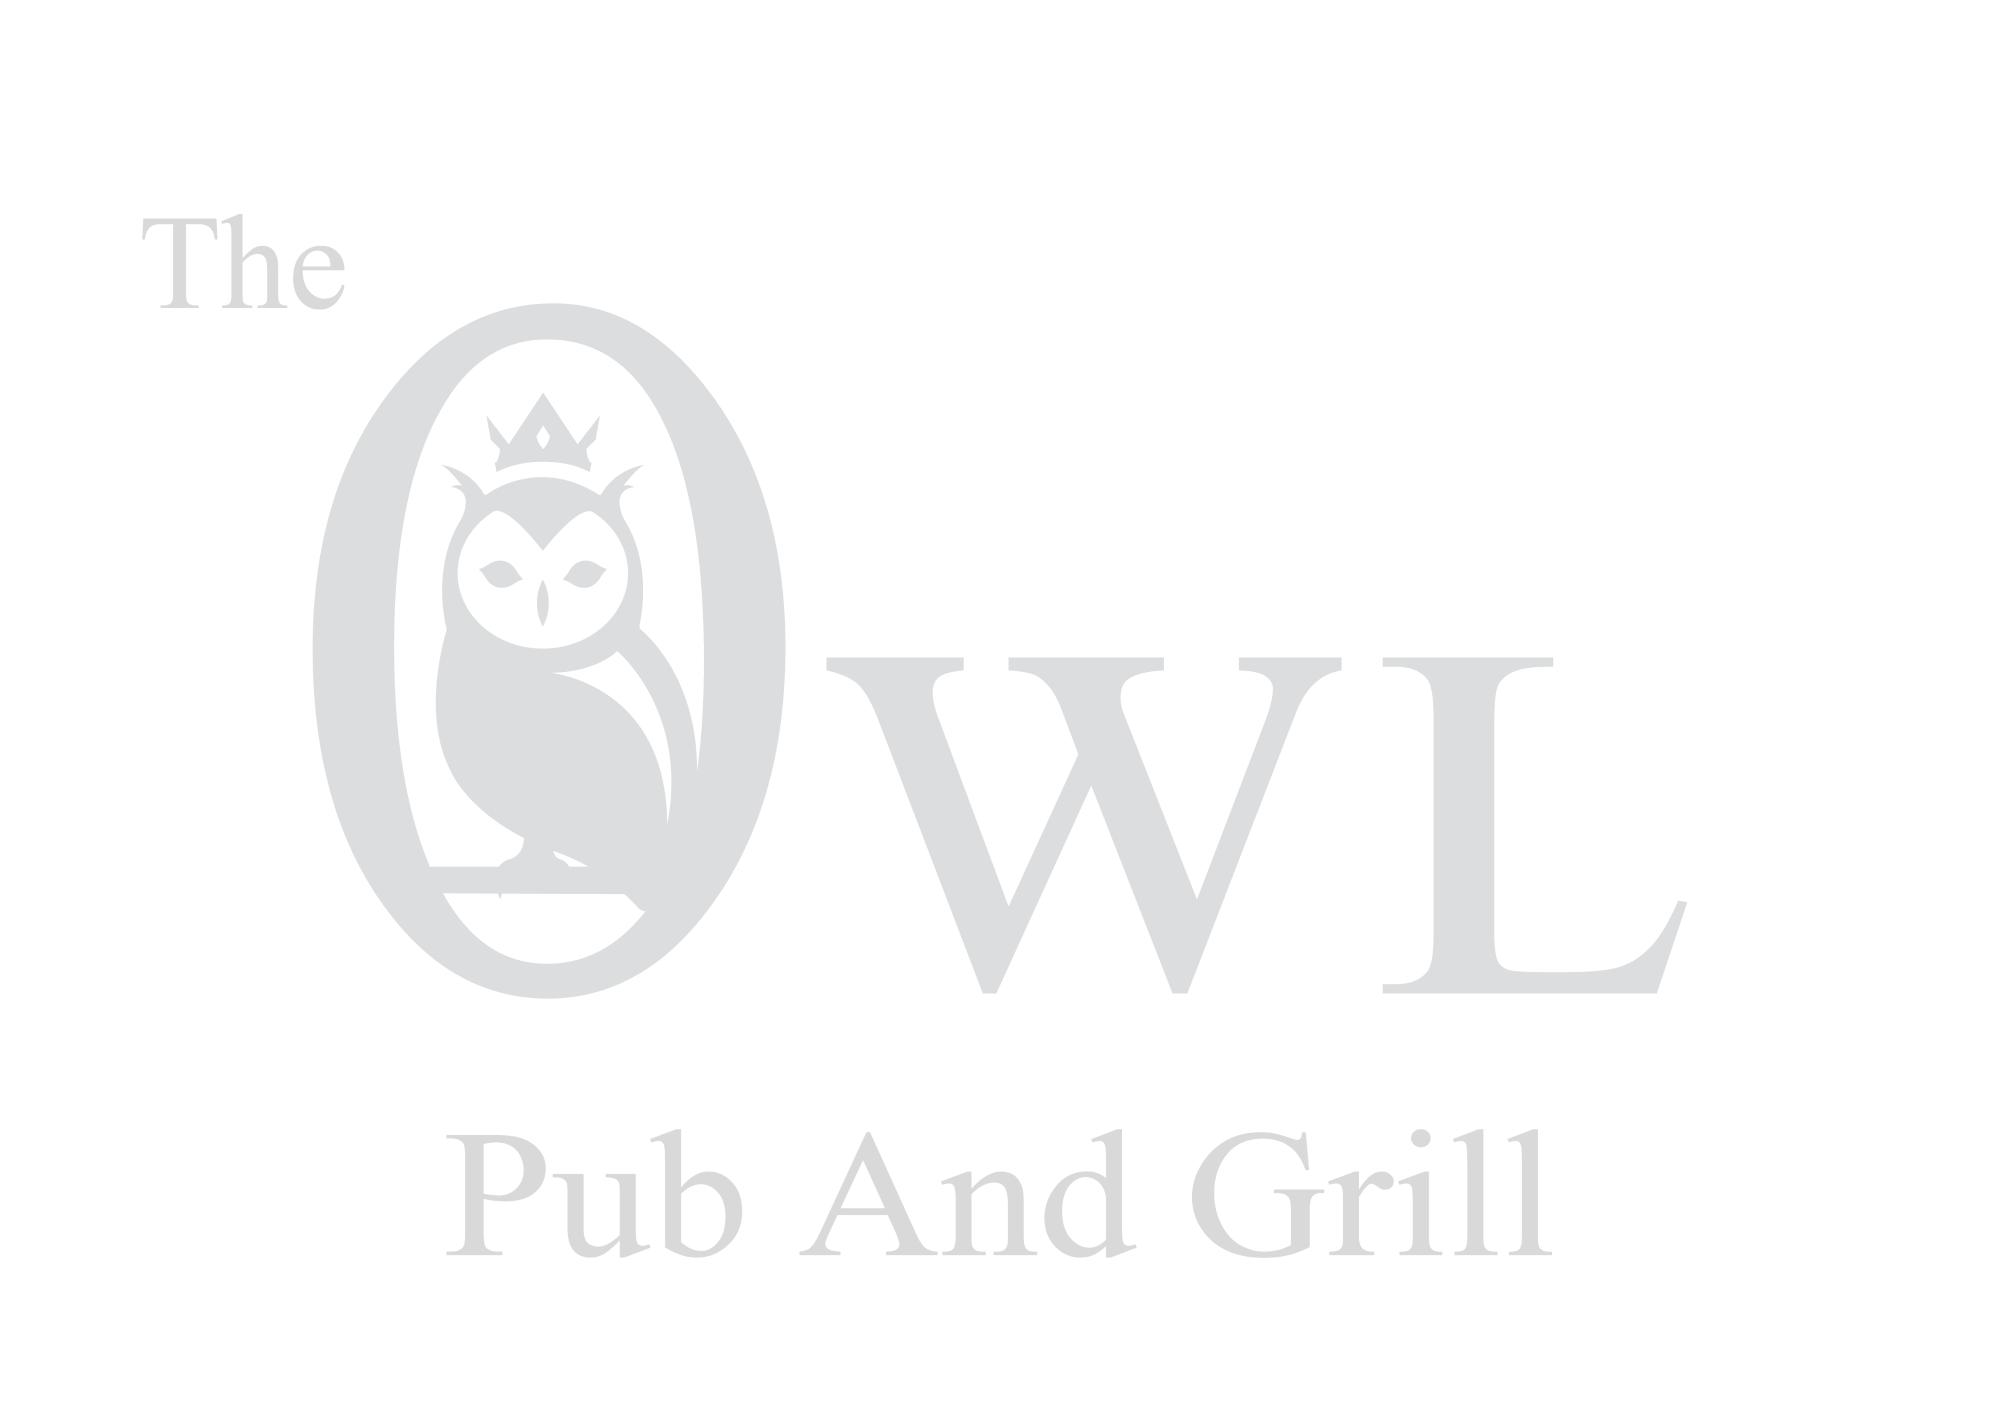 The Owl Camber